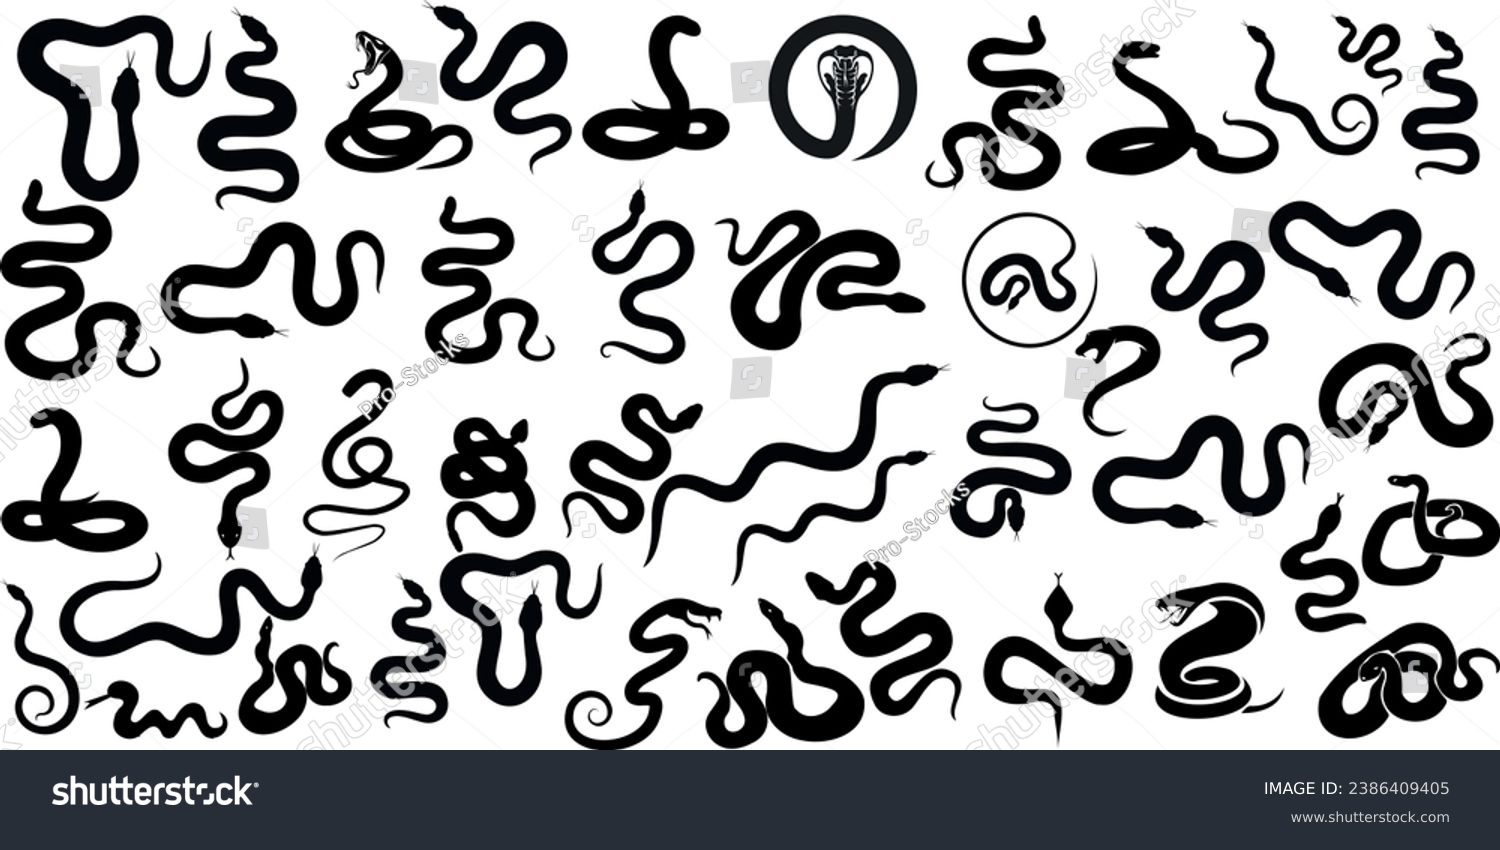 SVG of Snake Silhouette Vector Illustration, Features various snake shapes, sizes. Ideal for reptile, serpent themes. Python, rattlesnake, cobra, viper, anaconda, boa constrictor depicted svg